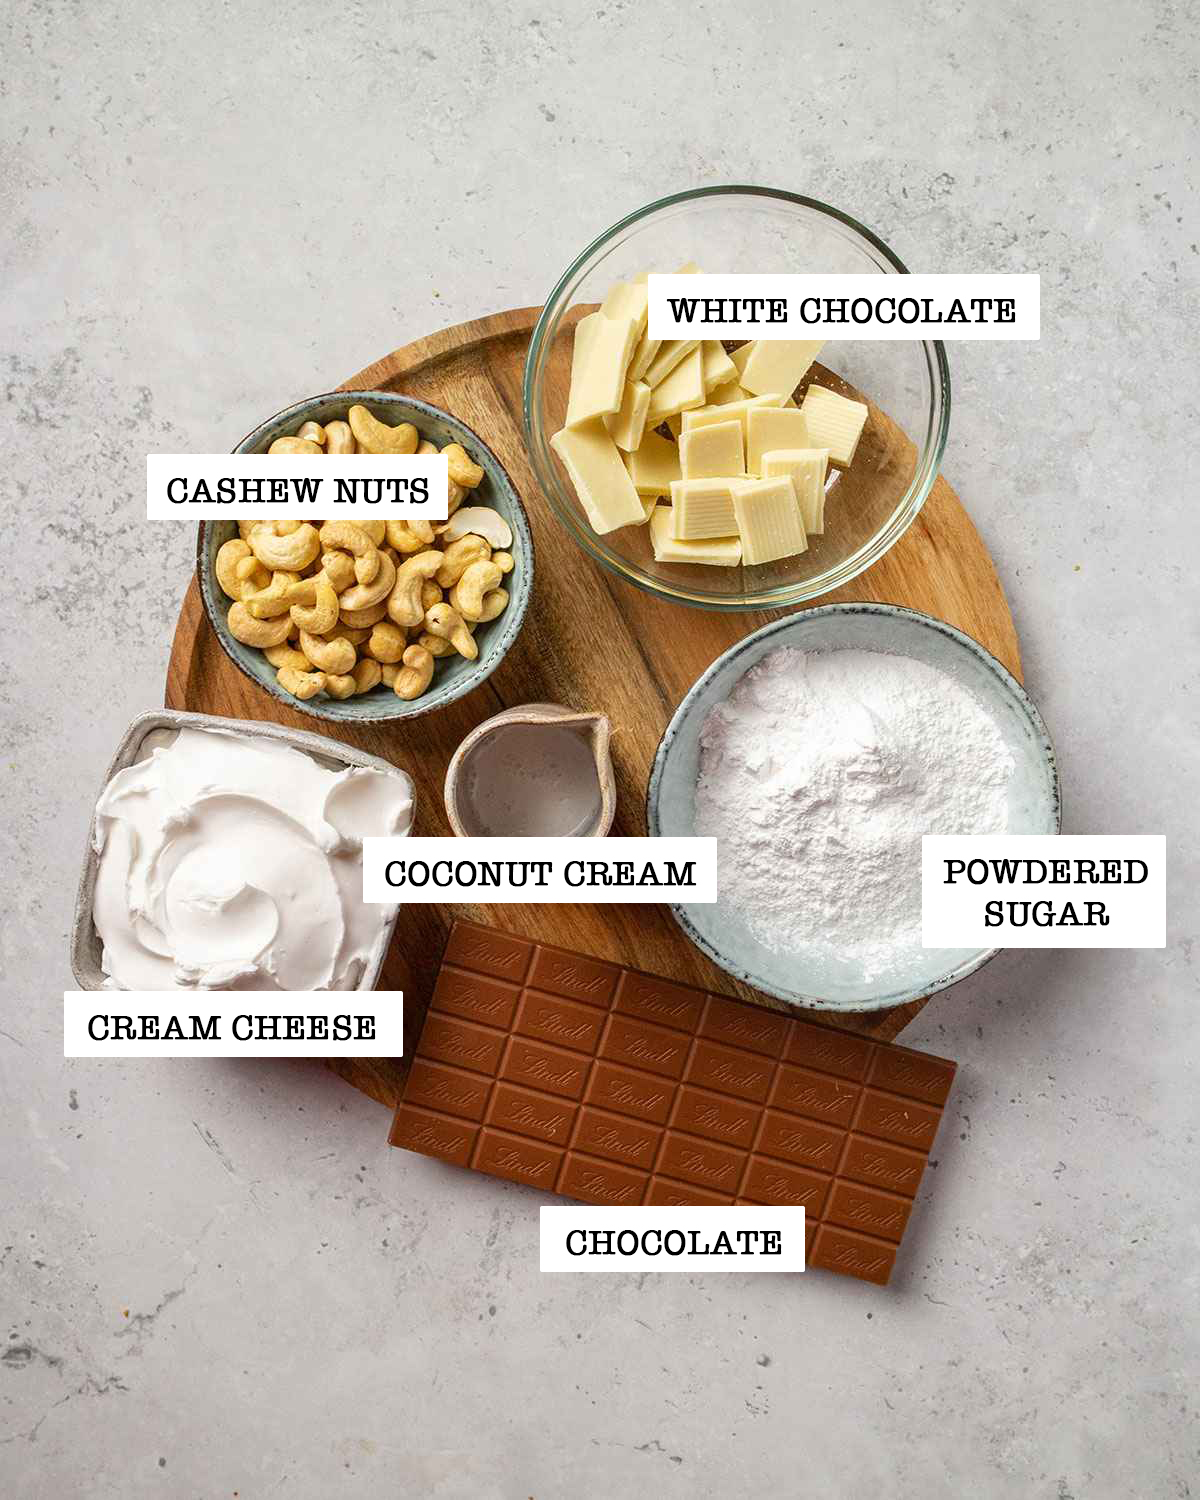 Ingredients for making cheesecake filled Easter eggs